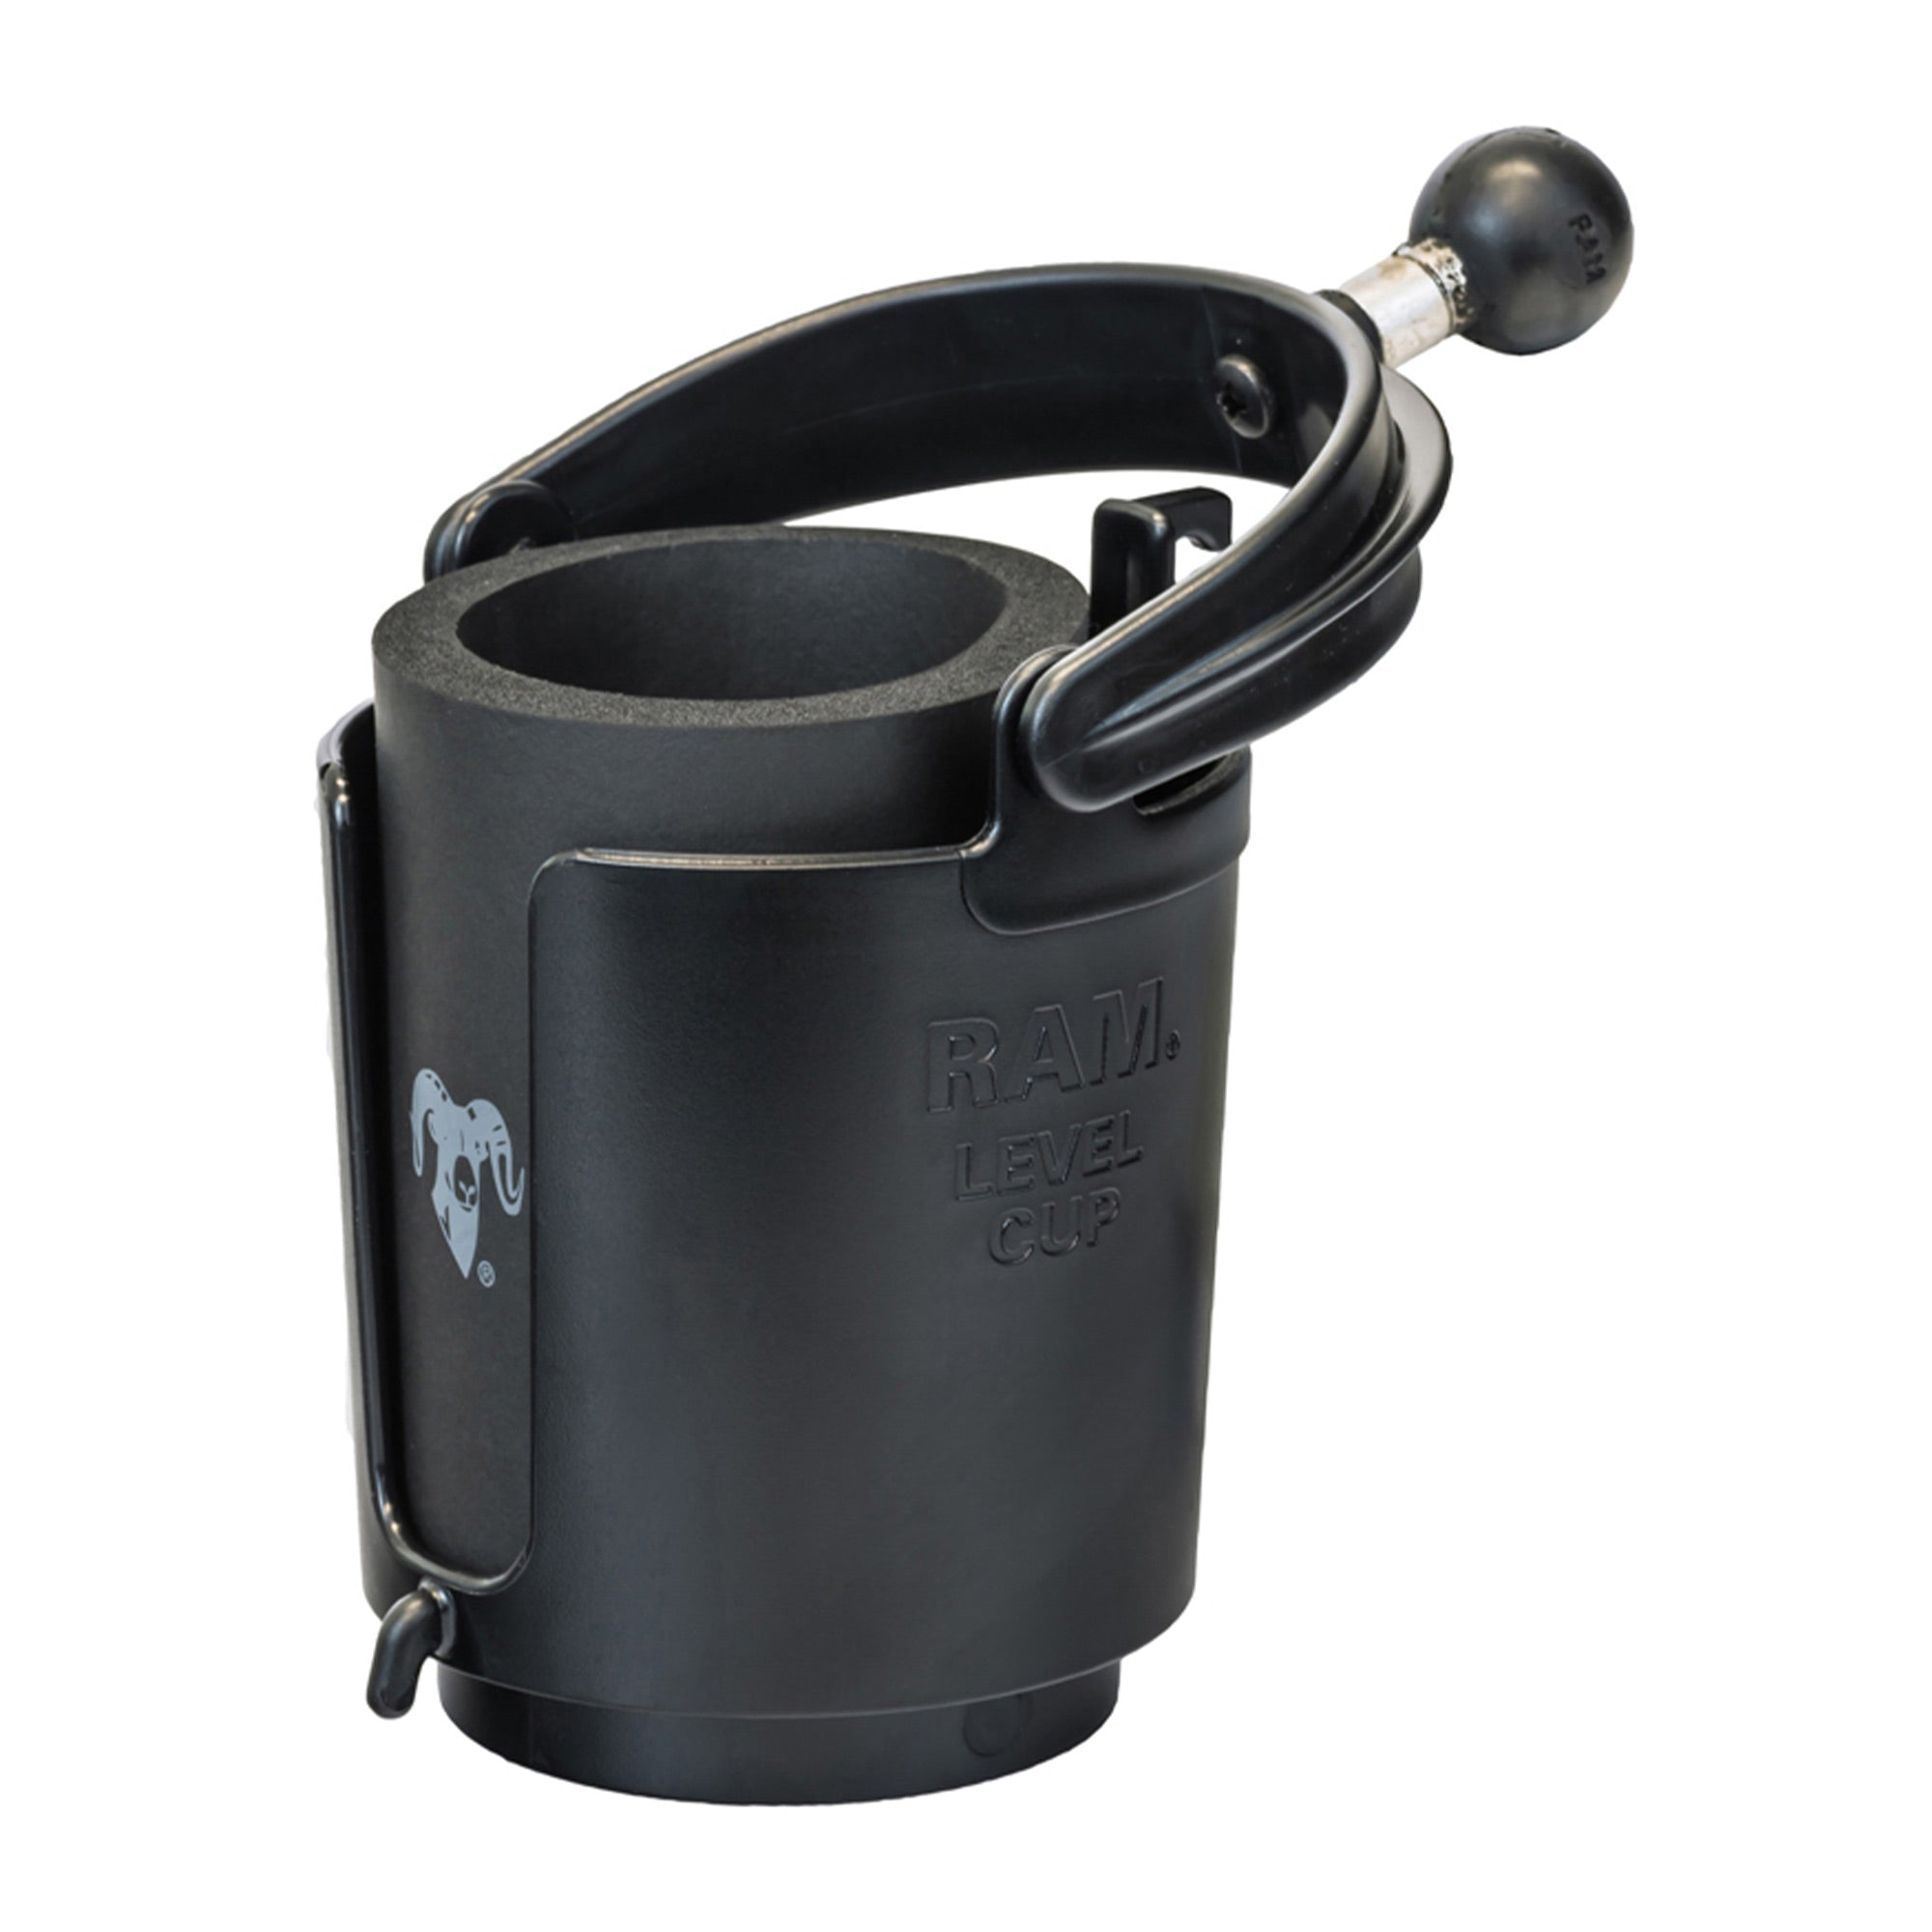 RAM Level Cup 16oz Drink Holder with Ball - B-Size